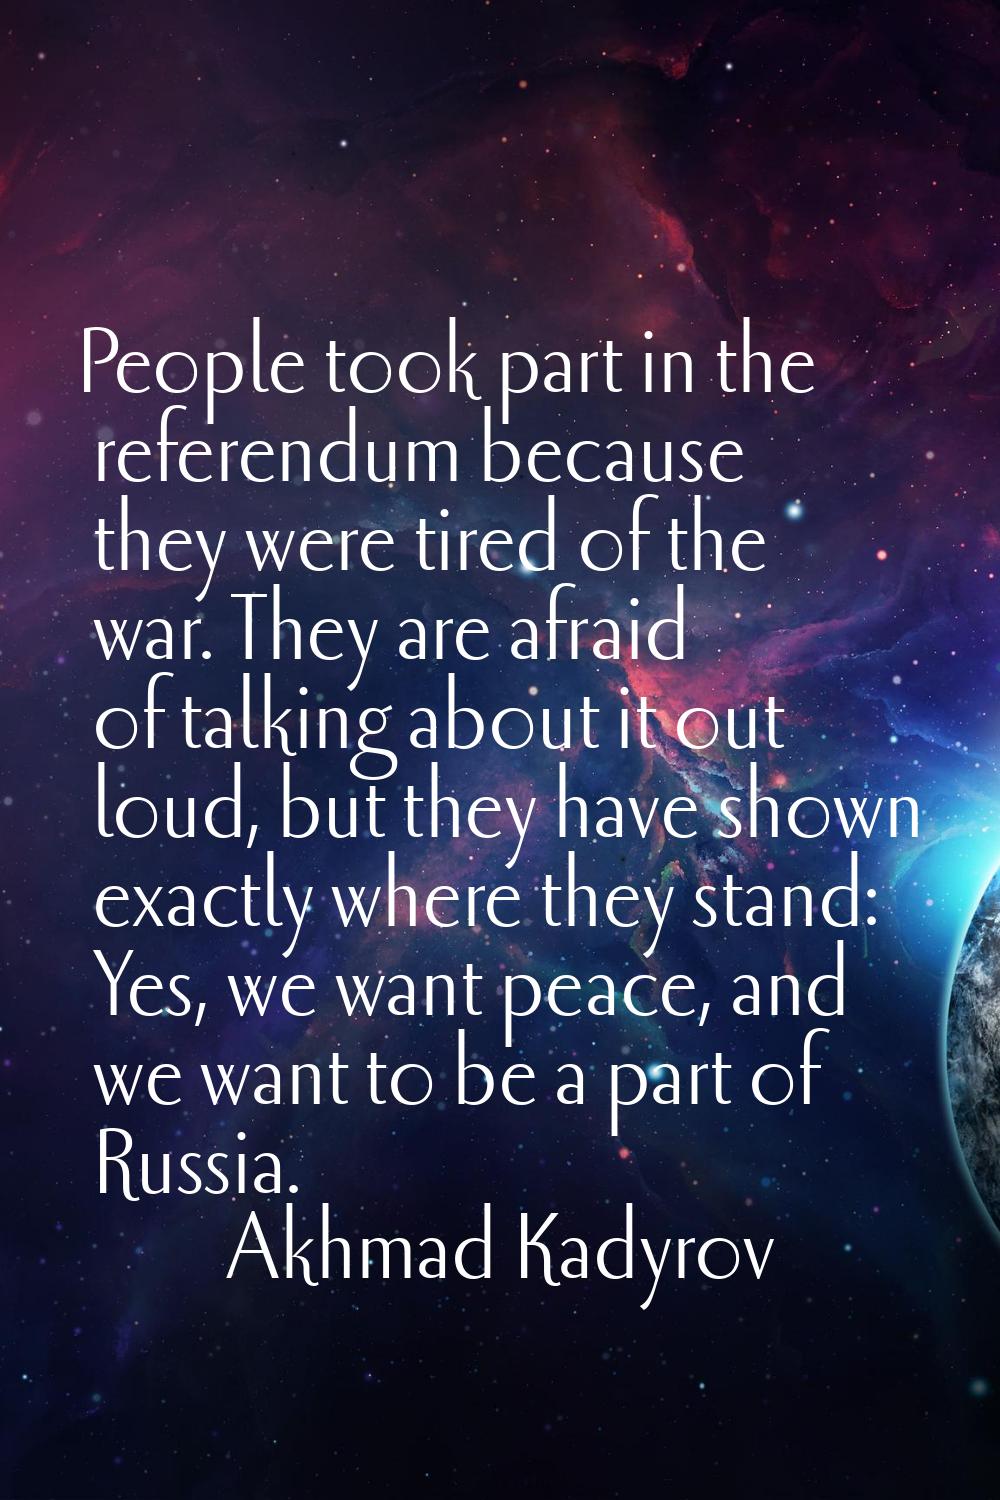 People took part in the referendum because they were tired of the war. They are afraid of talking a